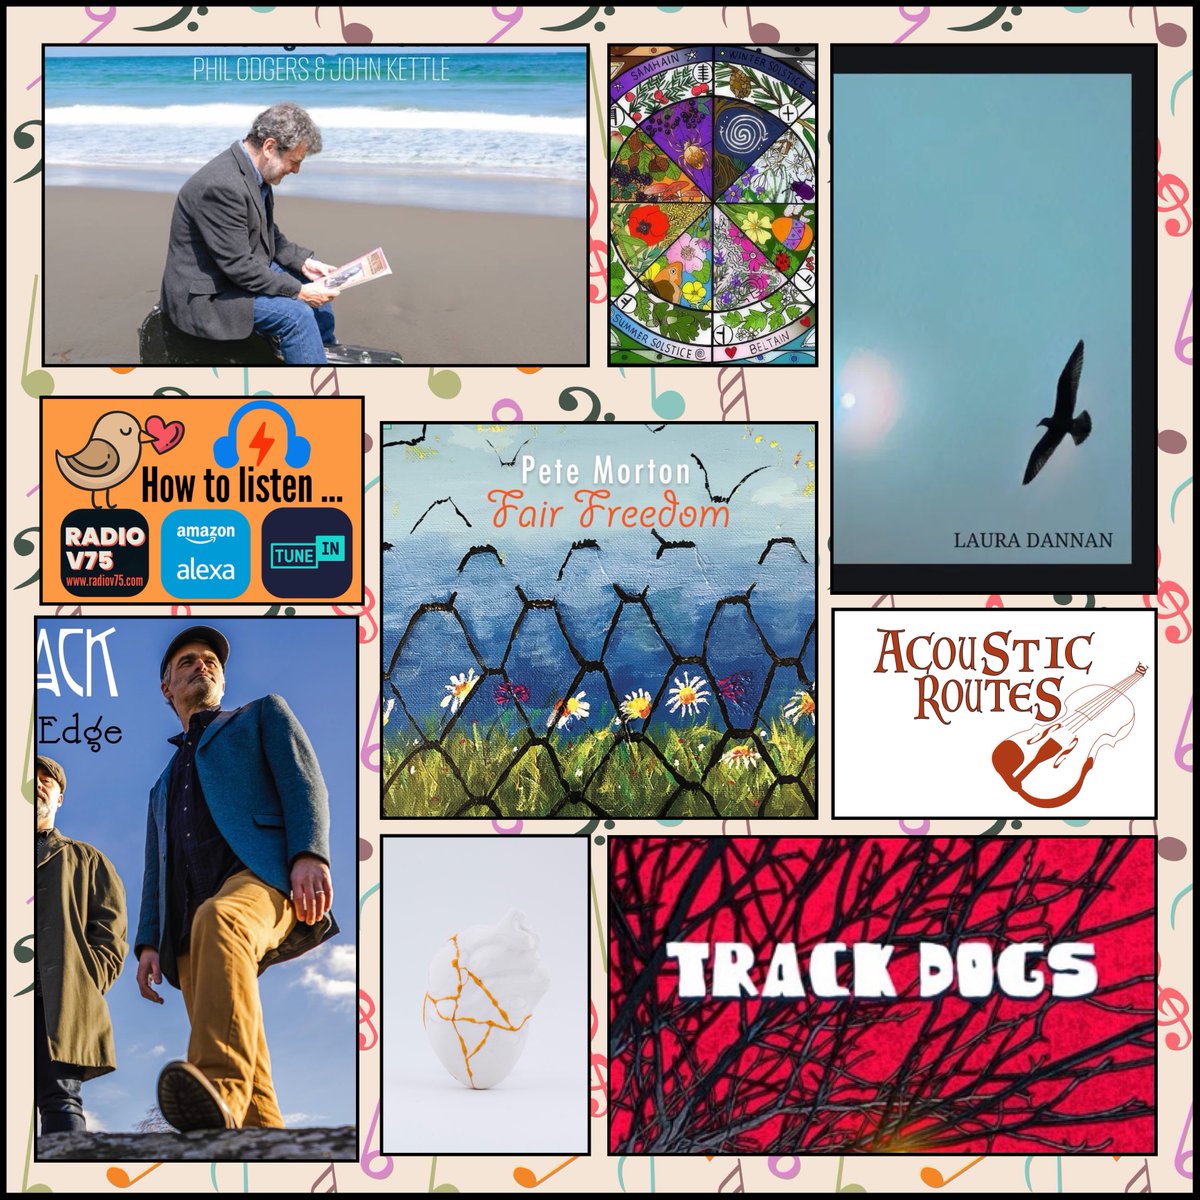 On this week’s @AcousticRoutes, show 493, the featured album is from @petemortonmusic & there will be music from @TangleJackBand @lauradannan @smalltownjones @TheCooleysBand @TrackDogsMusic @SwillOdgers @FaunOfficial and more. Tune in to radiov75.com Weds 7pm U.K. time